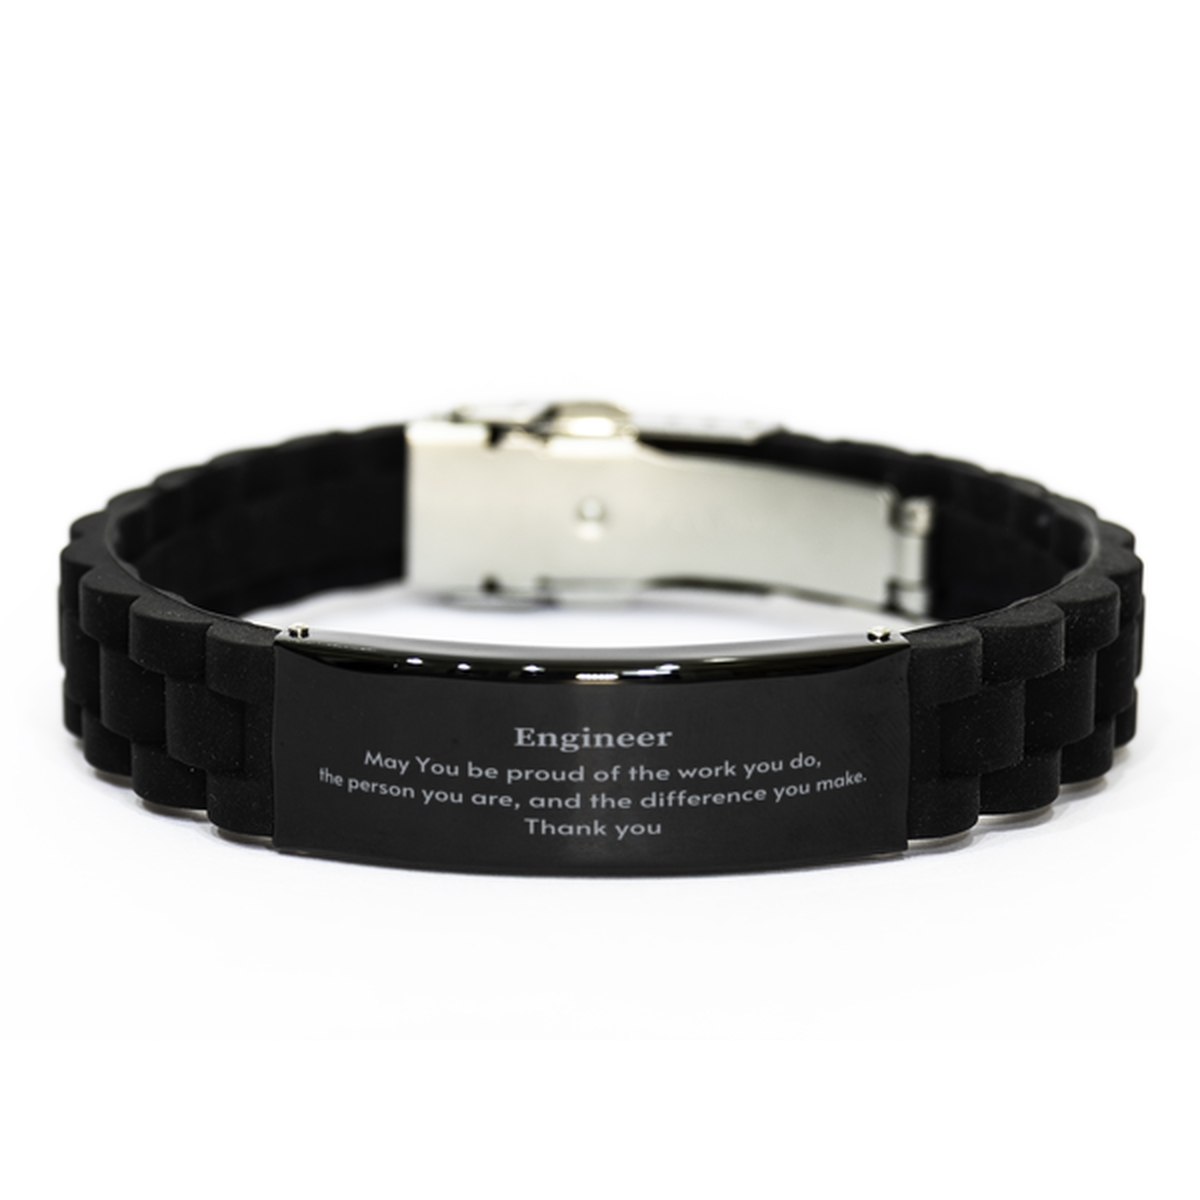 Heartwarming Black Glidelock Clasp Bracelet Retirement Coworkers Gifts for Engineer, Engineer May You be proud of the work you do, the person you are Gifts for Boss Men Women Friends